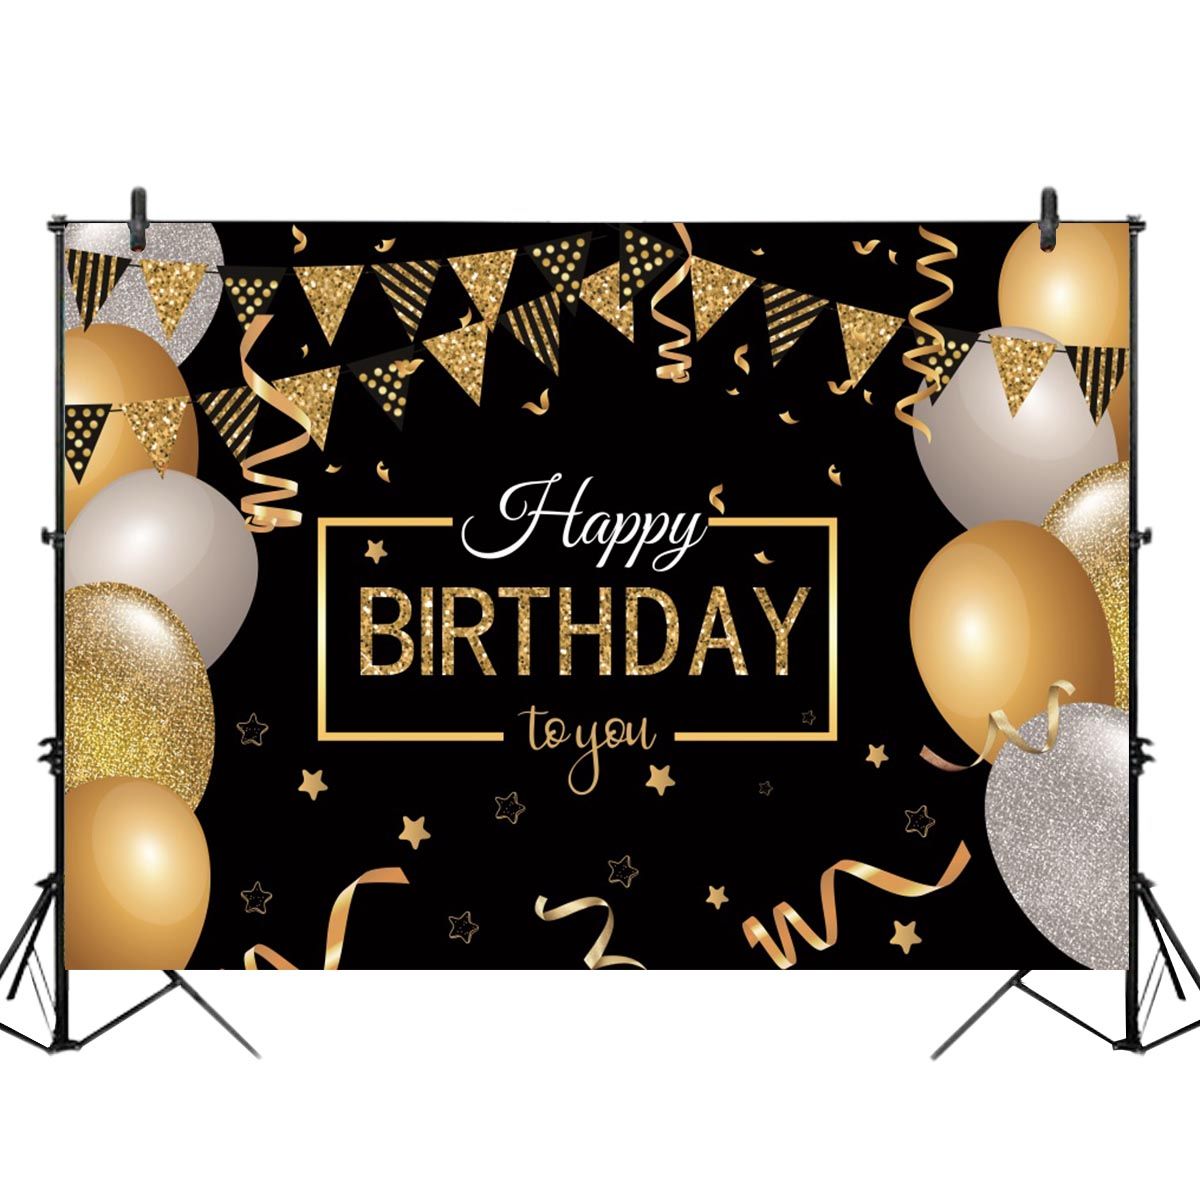 5x3FT-7x5FT-9x6FT-Gold-Balloons-Happy-Birthday-Studio-Photography-Backdrops-Background-1680682